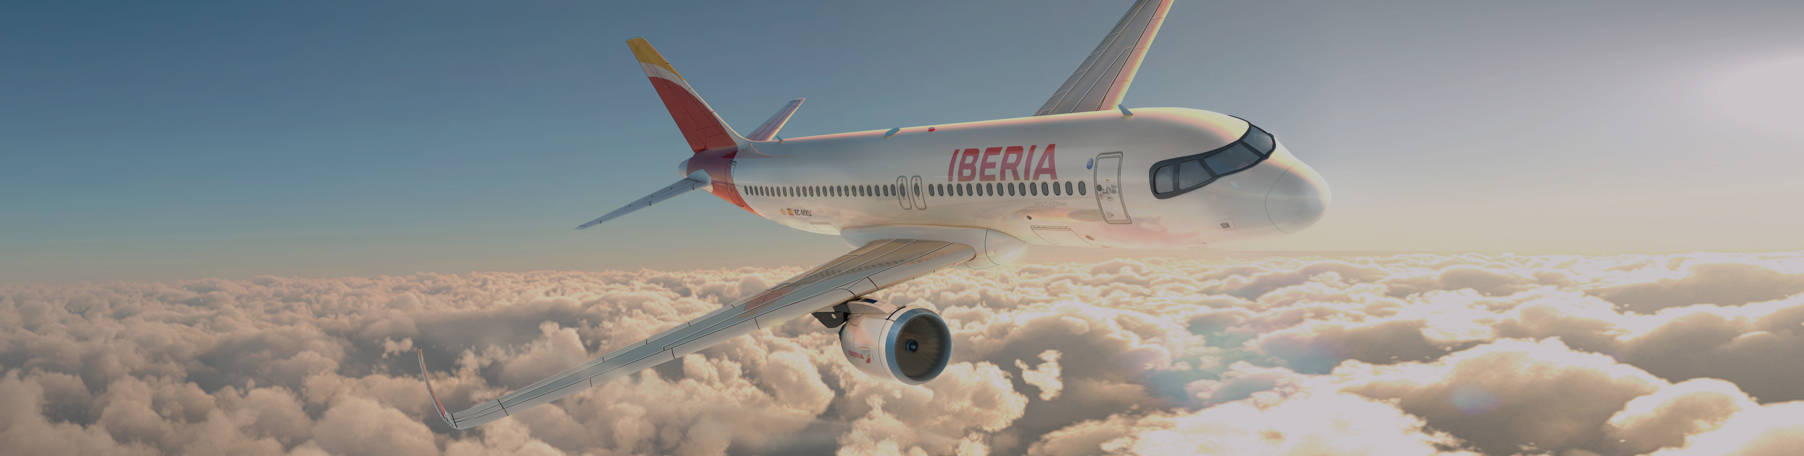 Iberia Airlines Airplane Gliding Above White Clouds Wallpaper